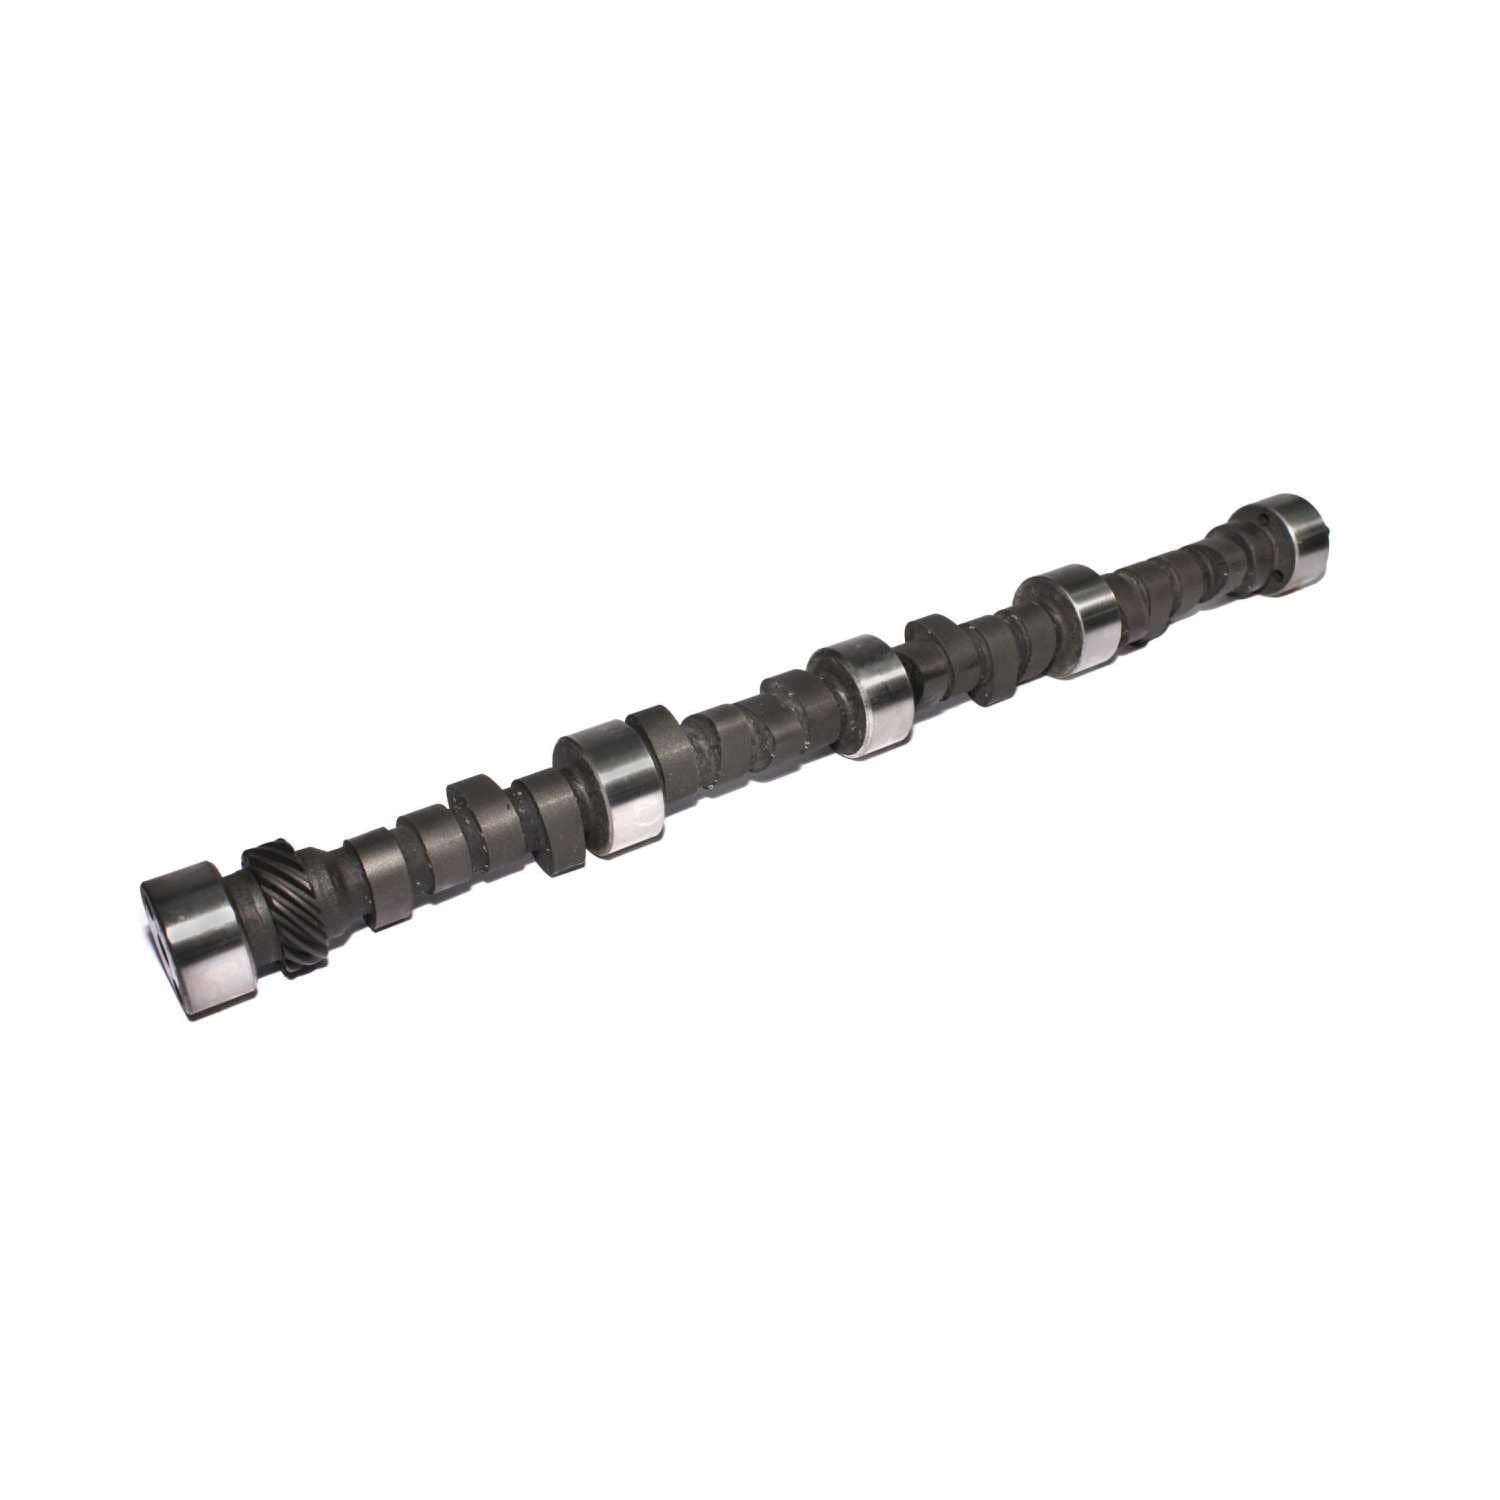 Competition Cams 11-682-47 Drag Race 4/7 Swap Firing Order Camshaft